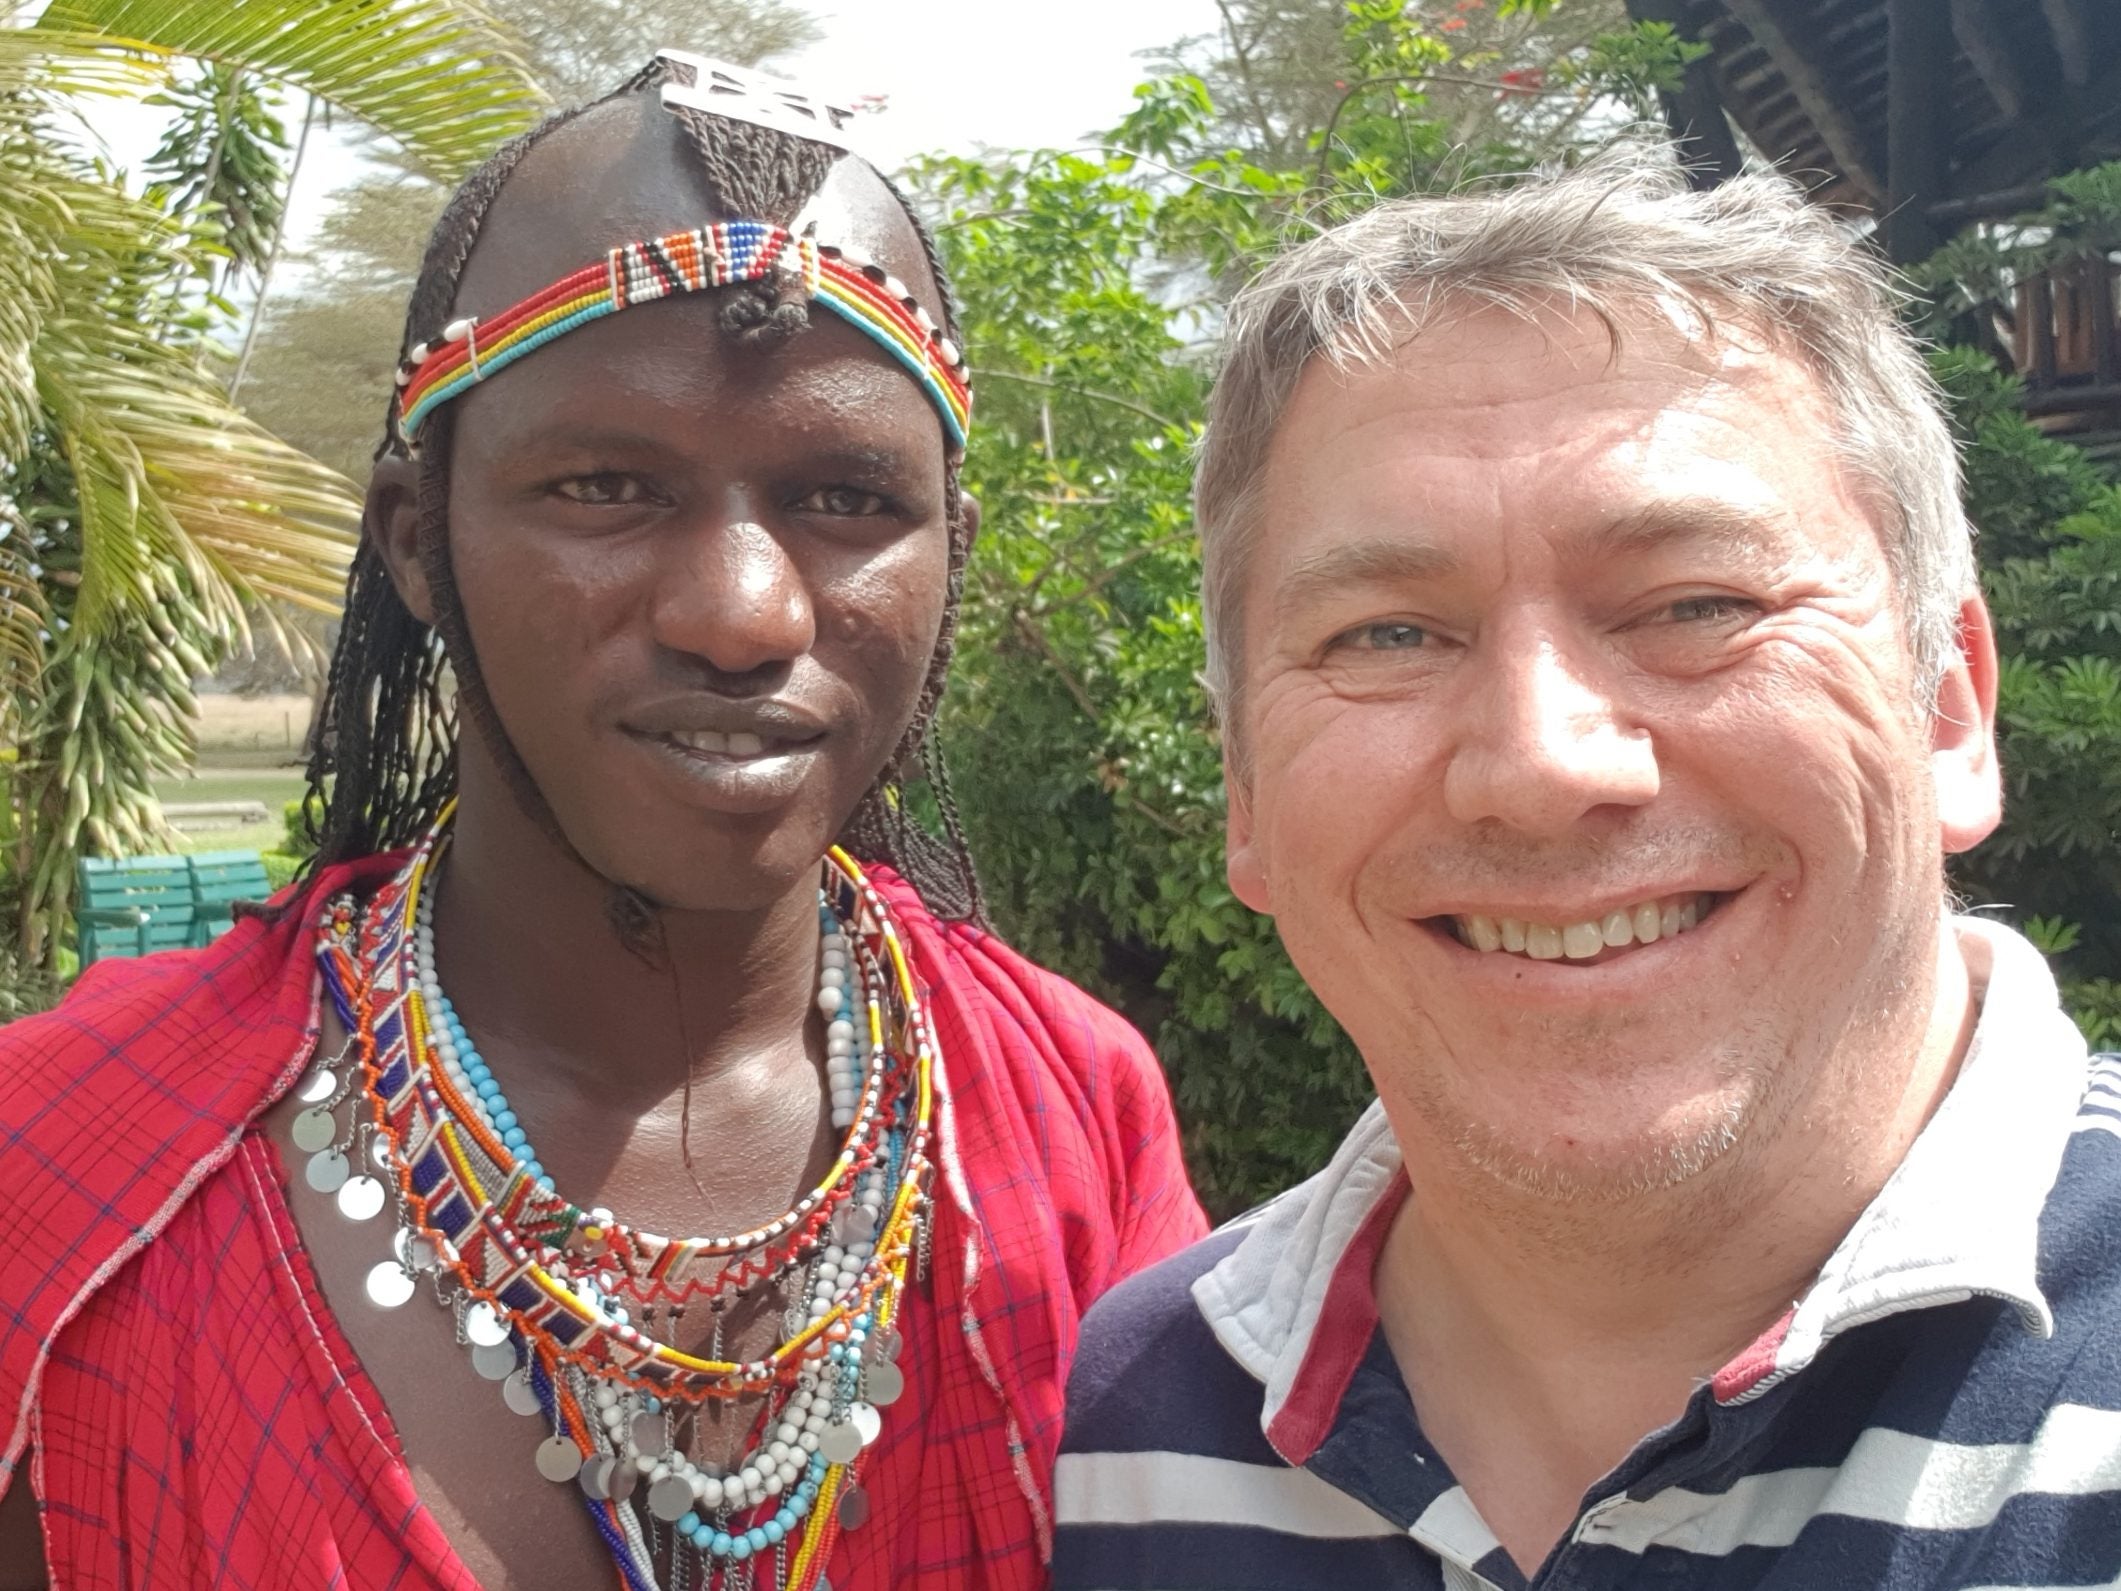 Ex Local World group digital editor who set up website for Brit expats in Kenya ‘as a hobby’ says it has become 'a bit of a beast'